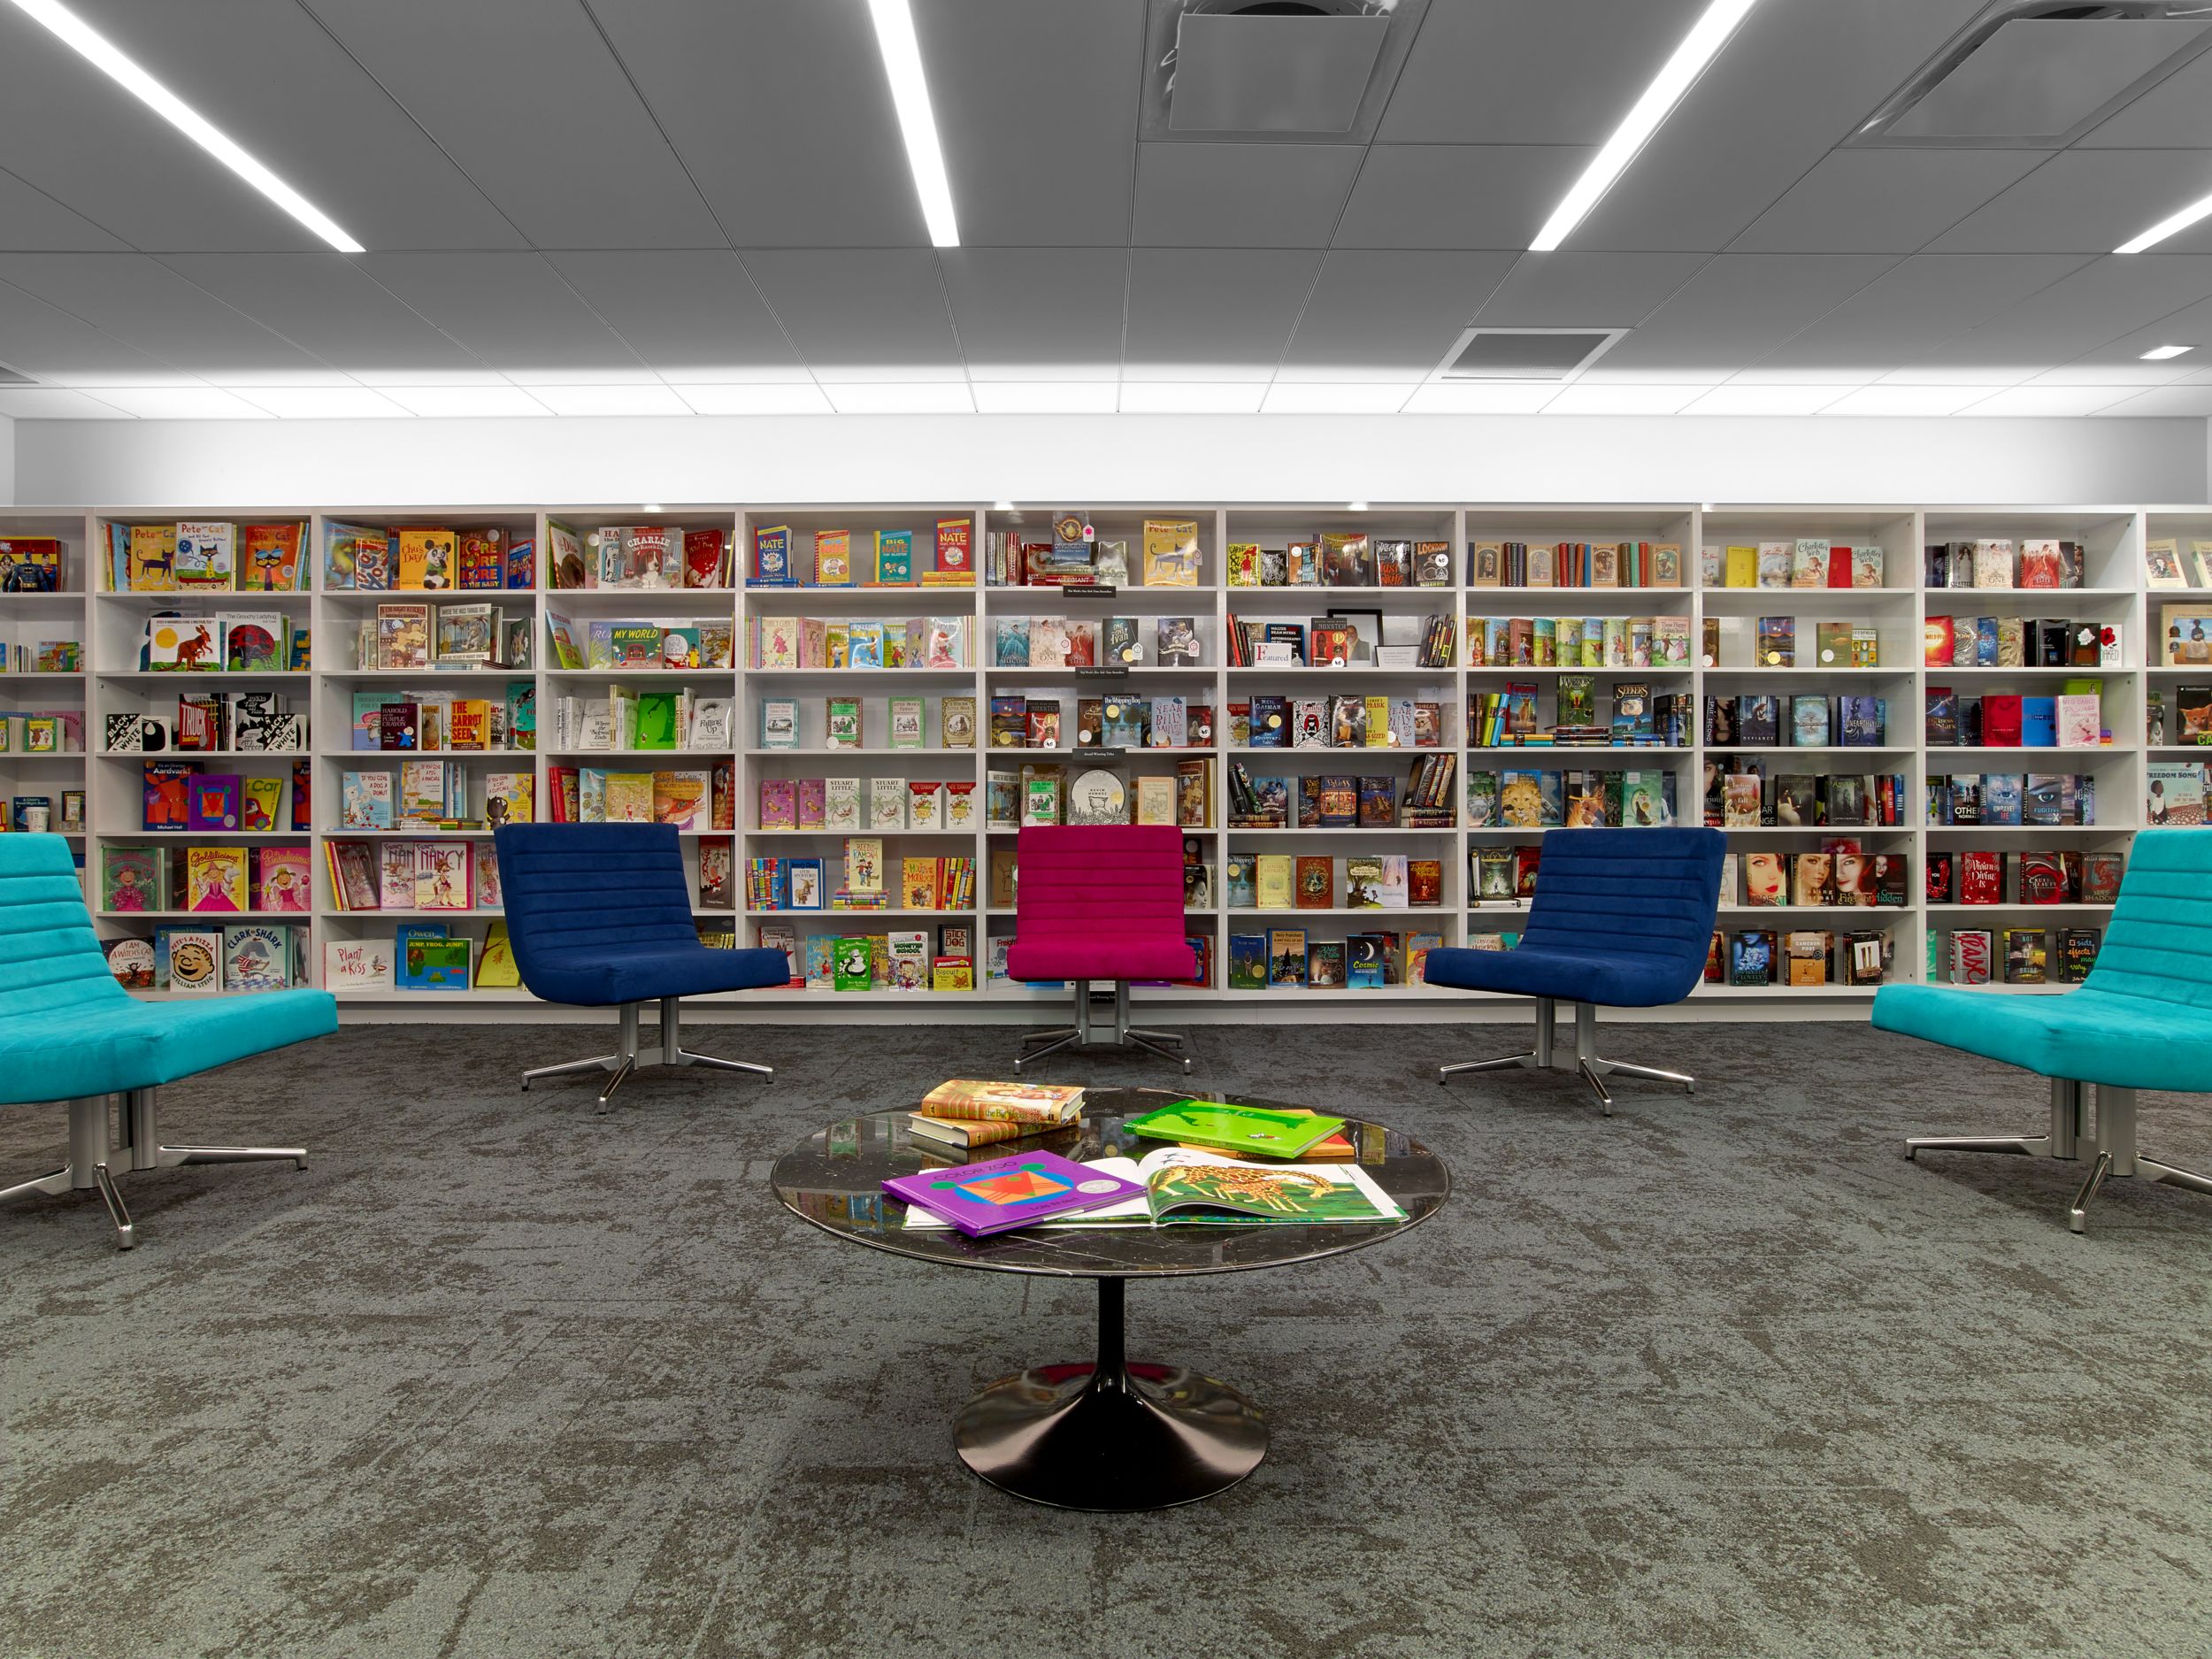 image Interface B603 carpet tile in area with bookshelves and colorful chairs numéro 3